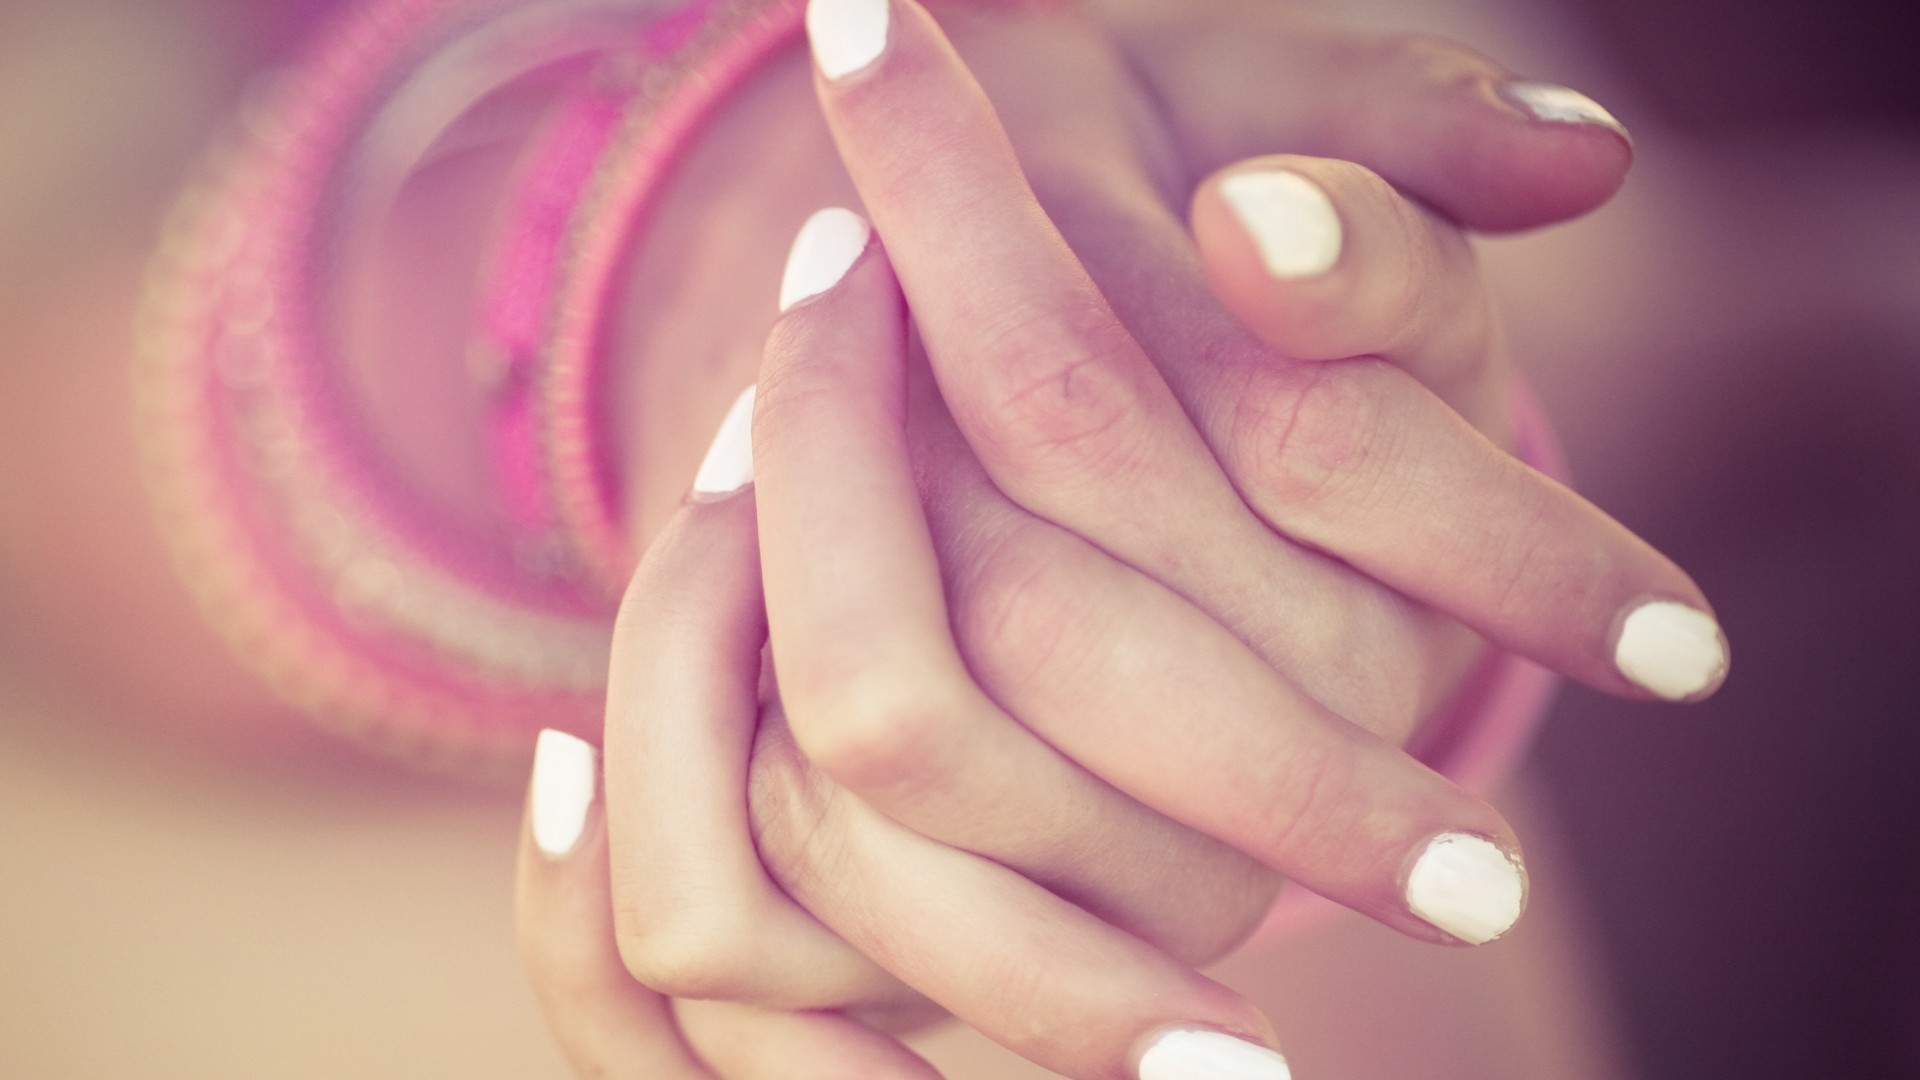 Depth Of Field Hands Fingers Painted Nails Holding Hands Women 1920x1080